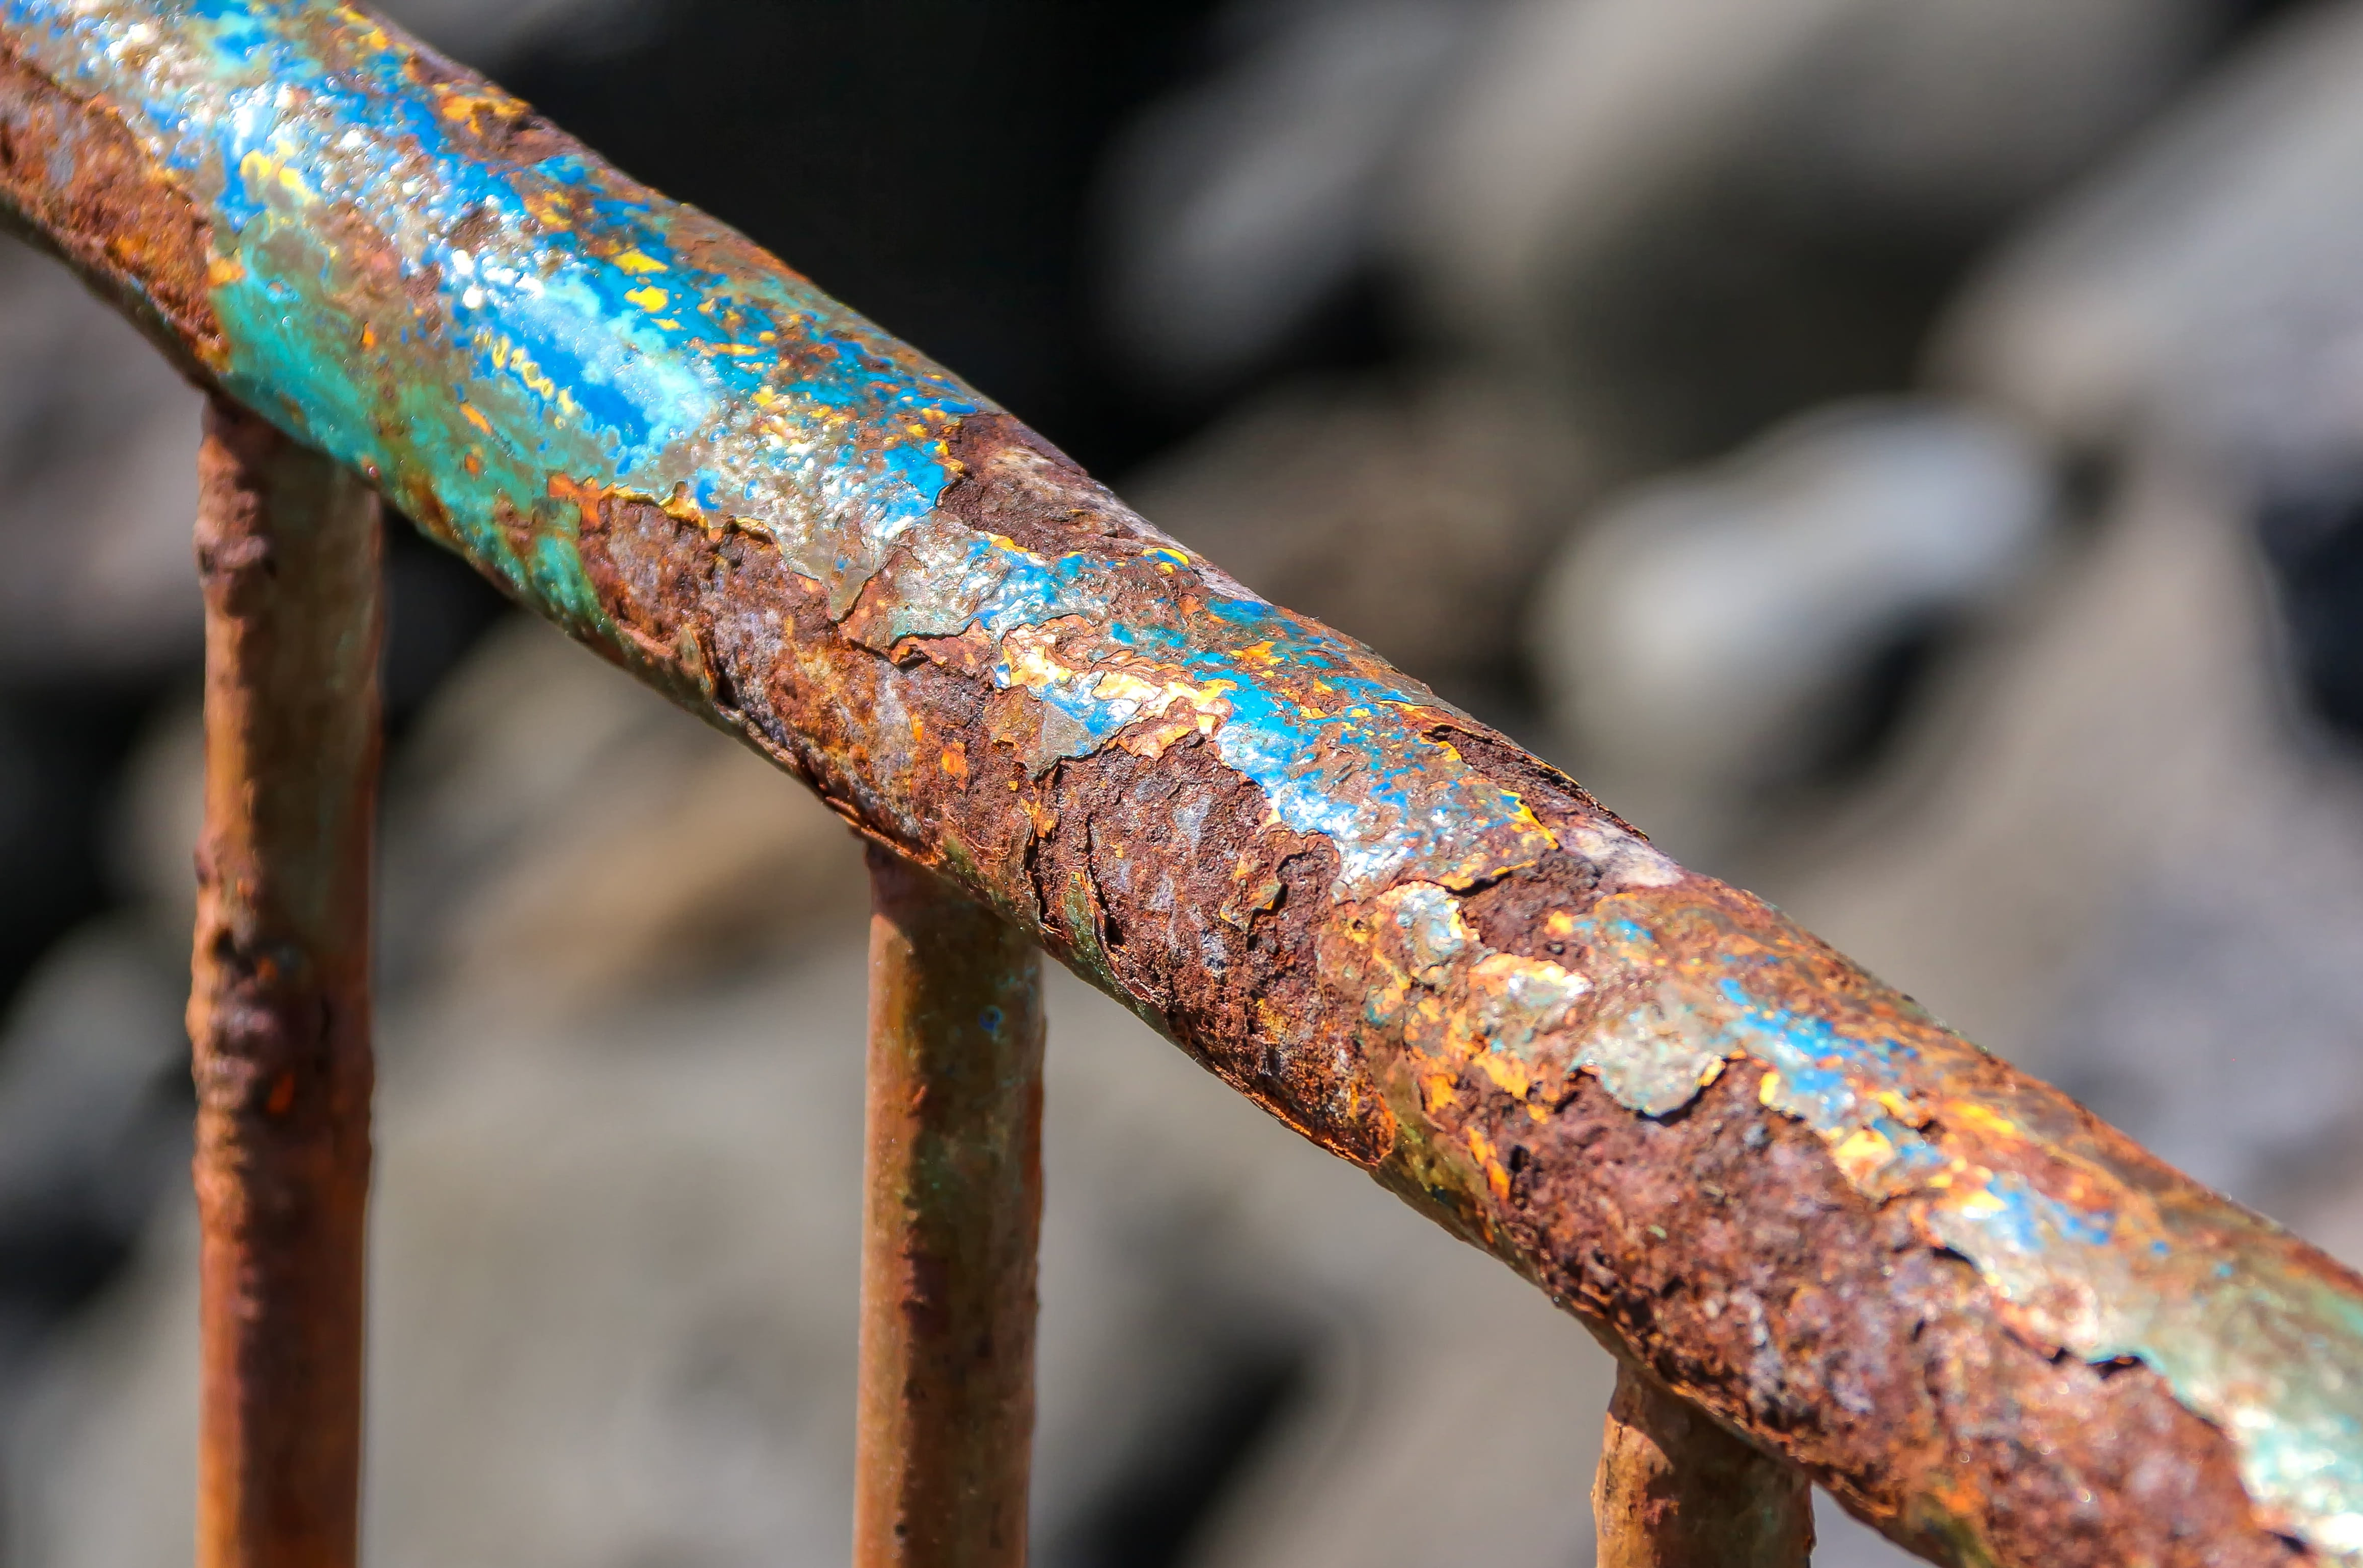 rusty-iron-structure-weathered-rust-rusted-metal-colorful-corroded (pikist.com) HR.jpg